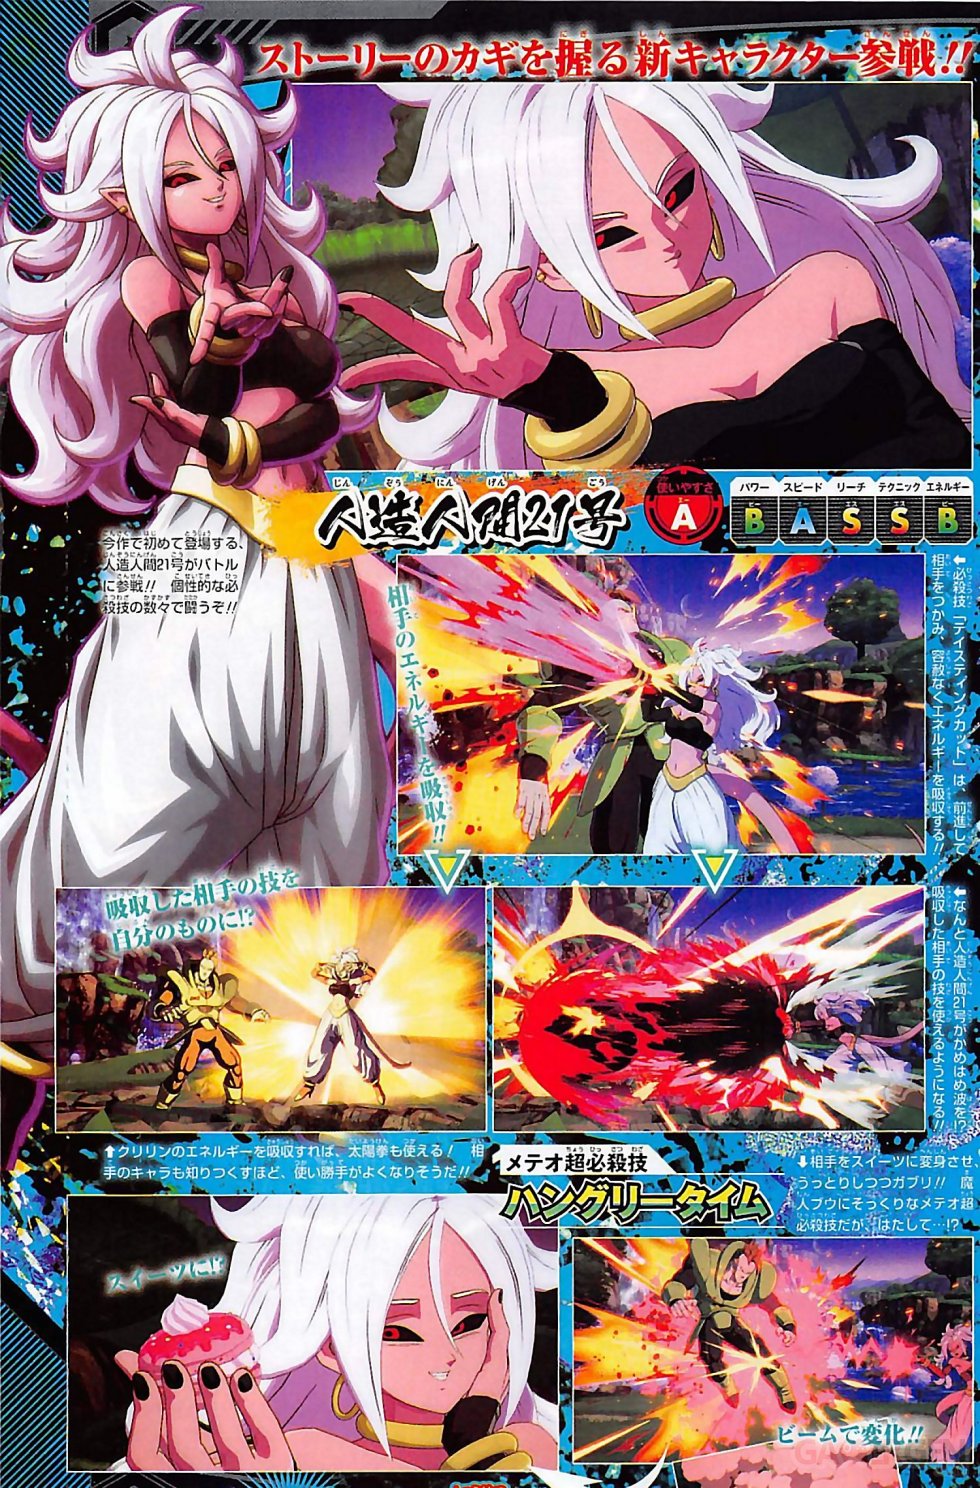 Dragon Ball FighterZ images C21 Majin (2)